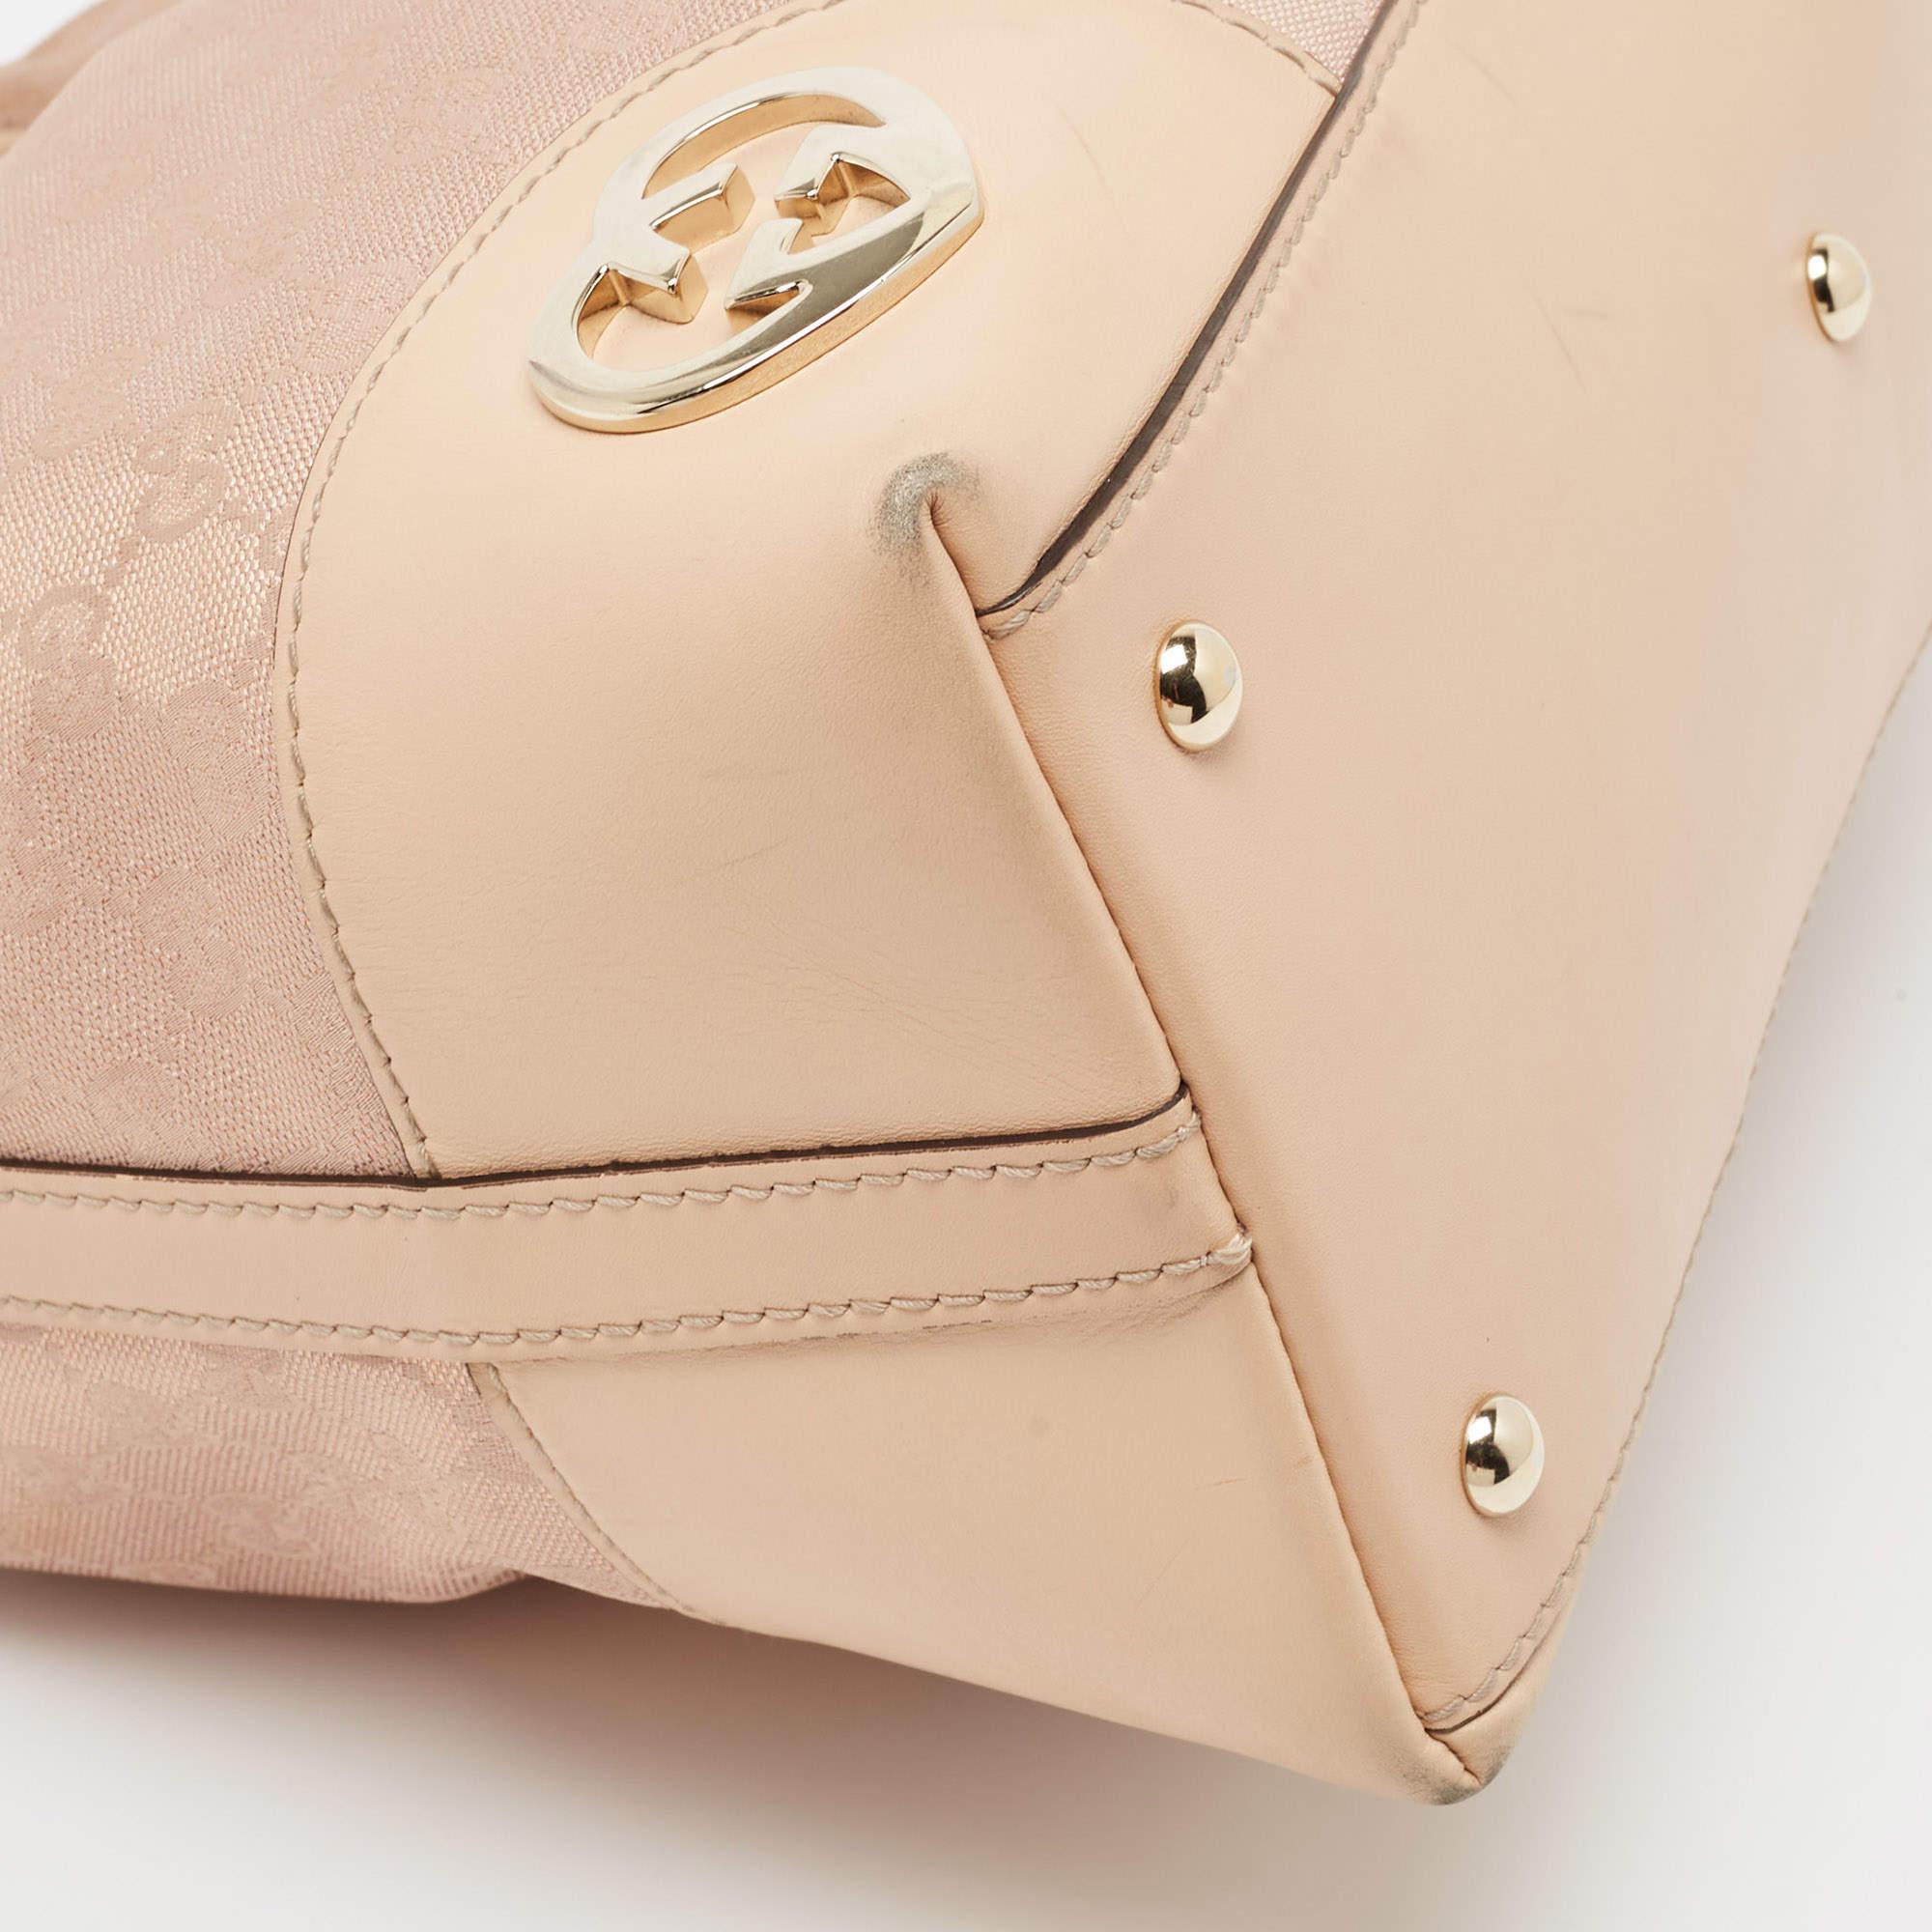 Gucci Beige/Metallic Pink GG Canvas and Leather Medium Lovely Hobo For Sale 8